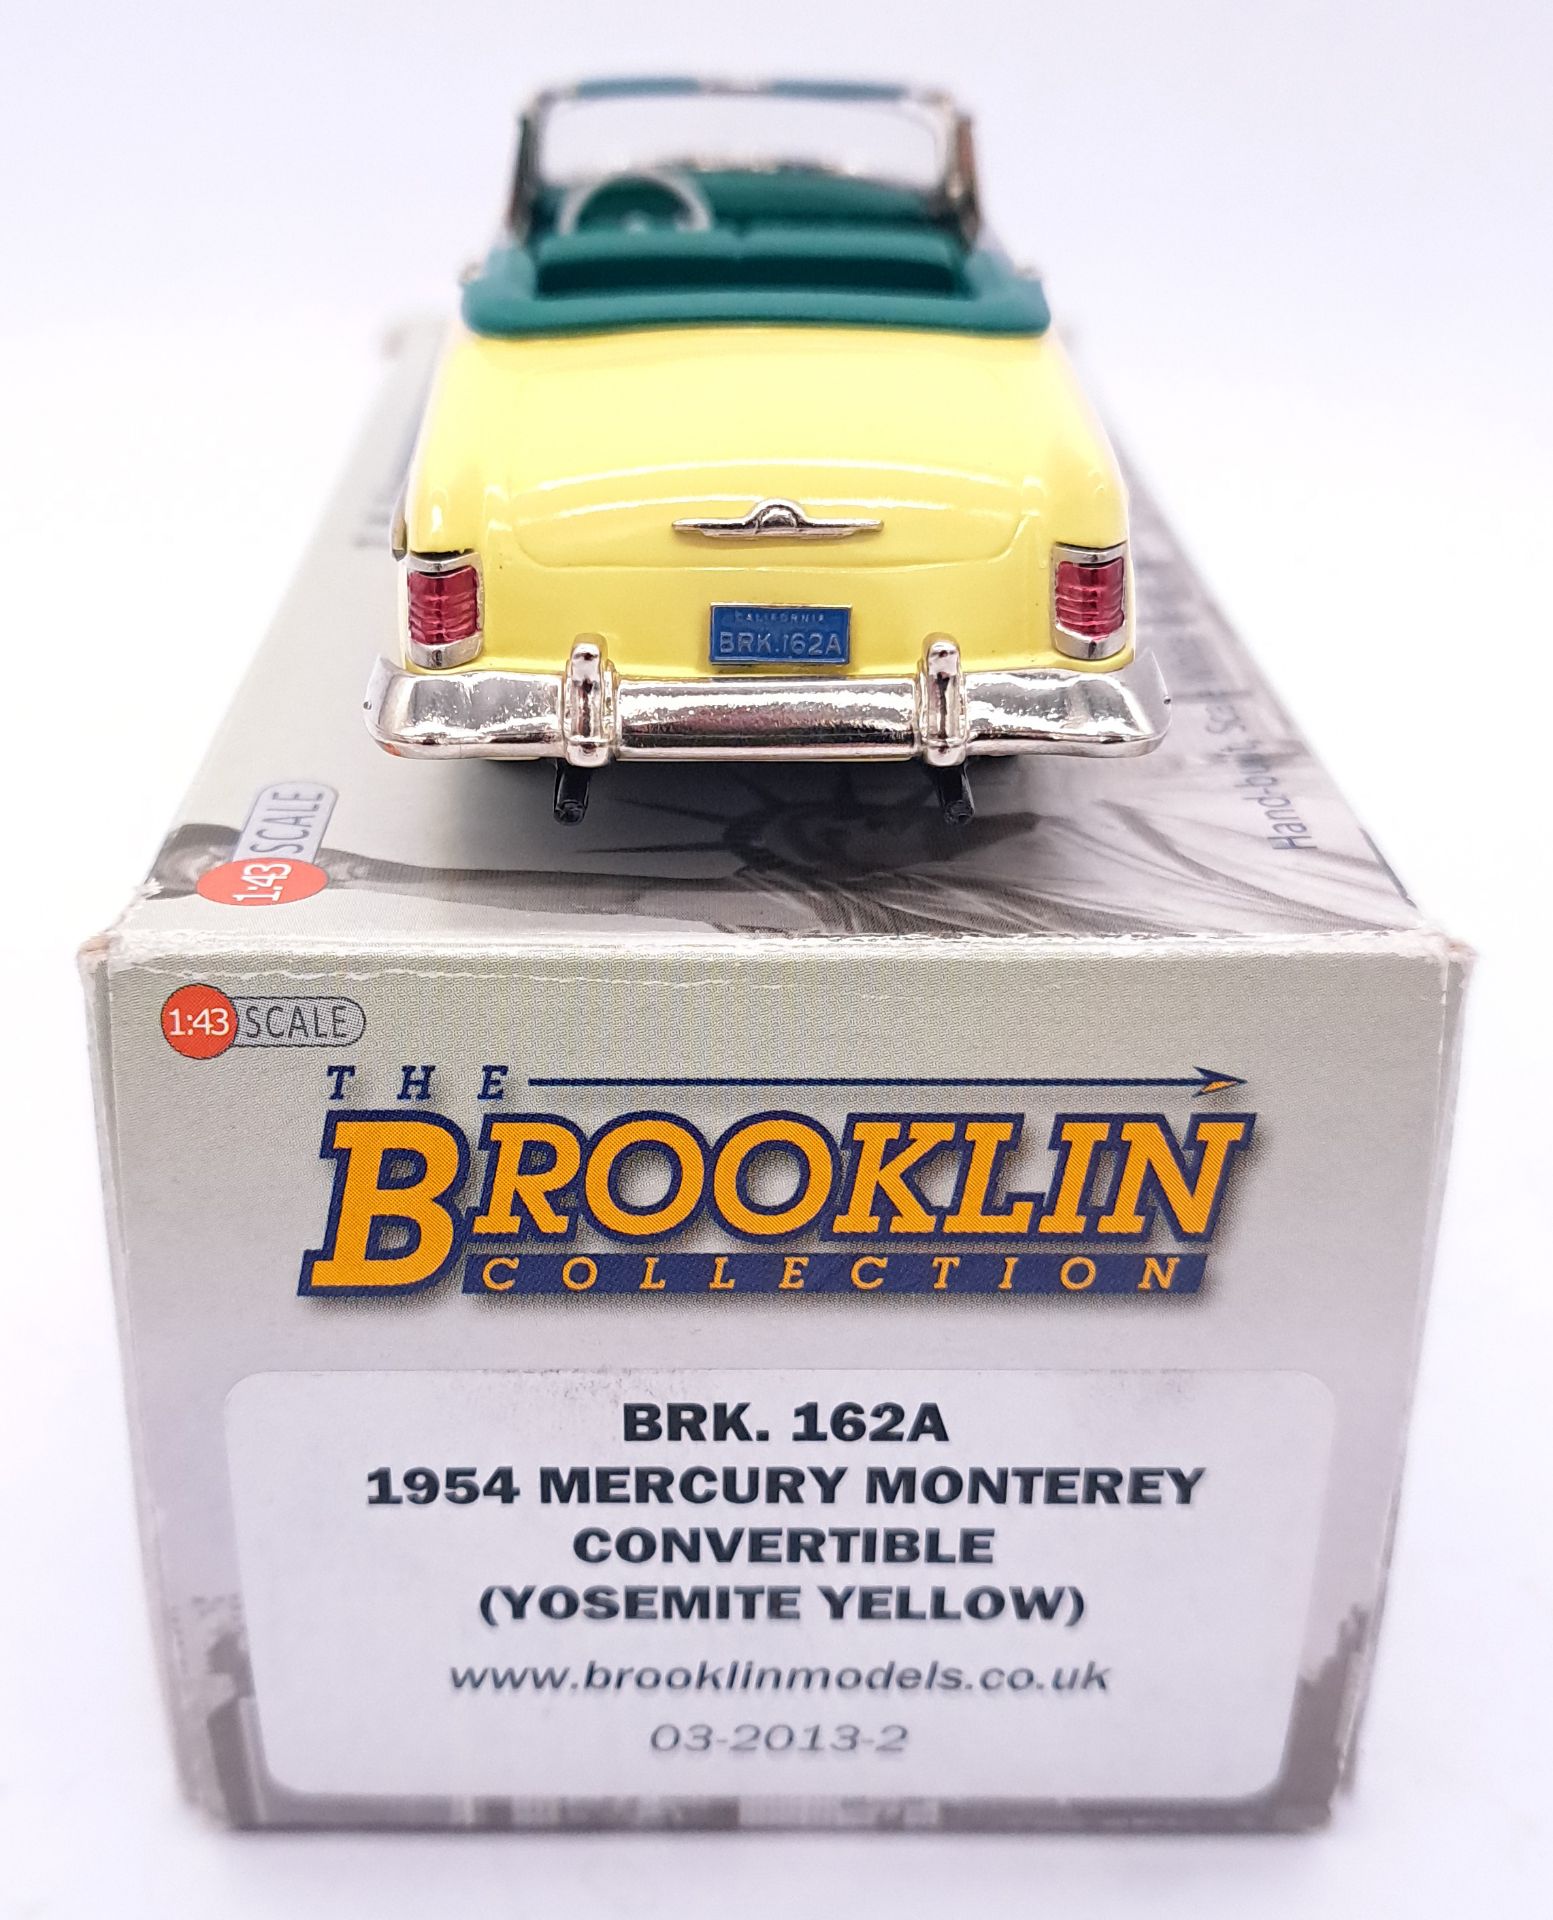 Brooklin Models a boxed 1:43 scale BRK.162A - Image 4 of 5